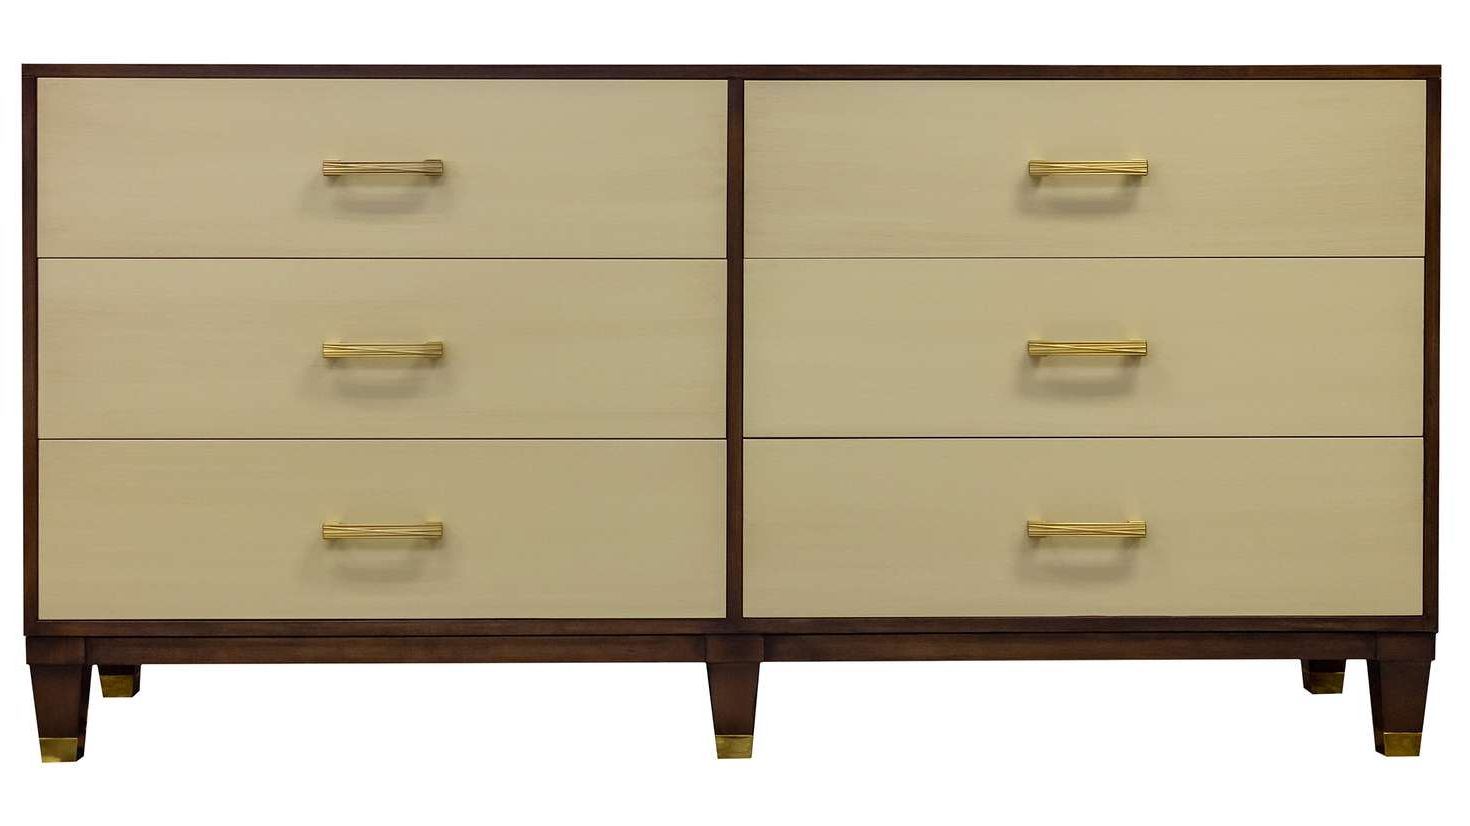 Facets 72" Credenza, Six Drawer | Councill Intended For Ocean Marble Credenzas (View 14 of 20)